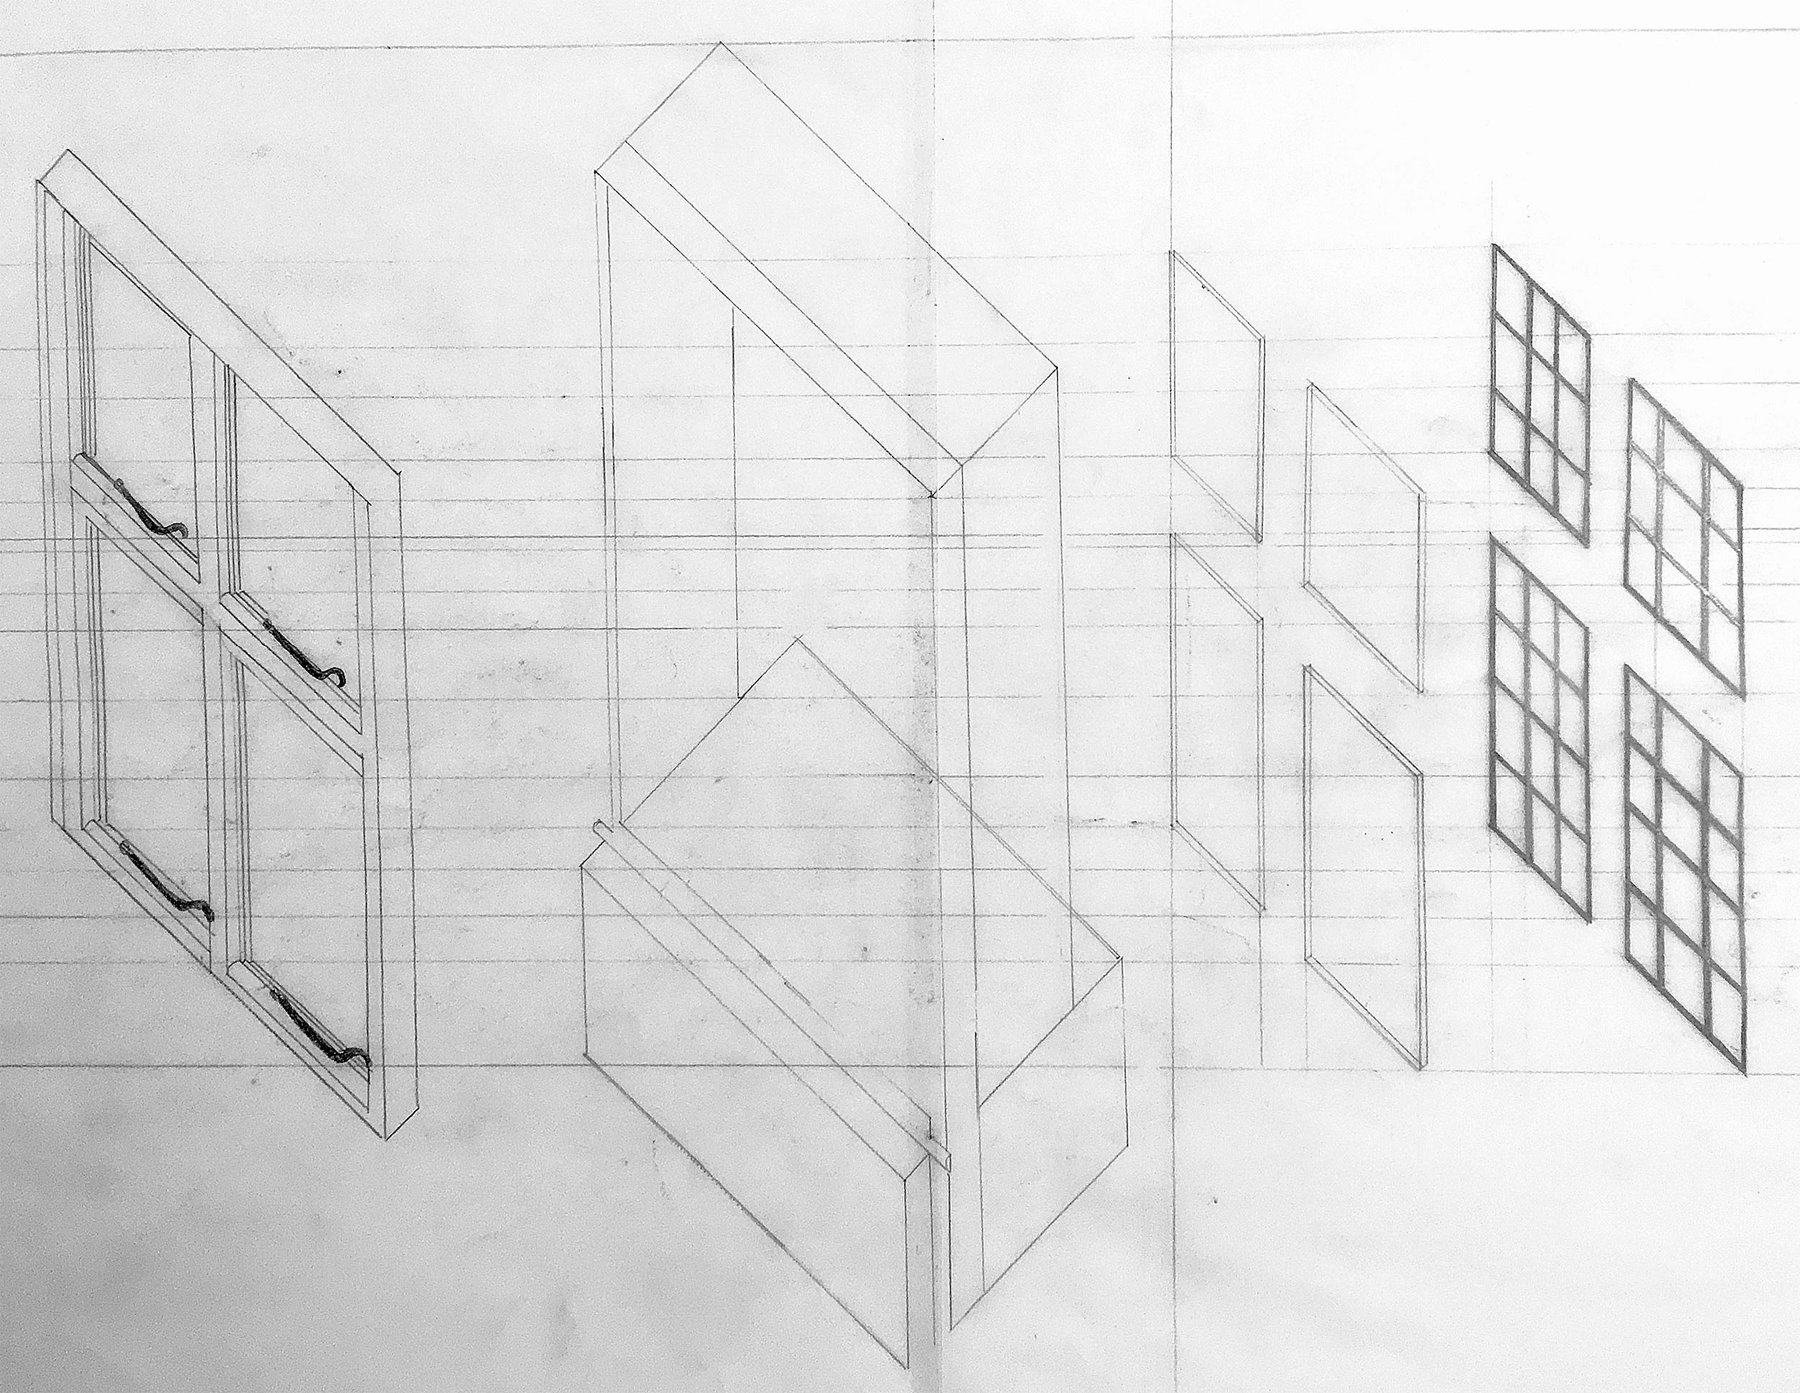 An exploded axonometric drawing showing the components of a window